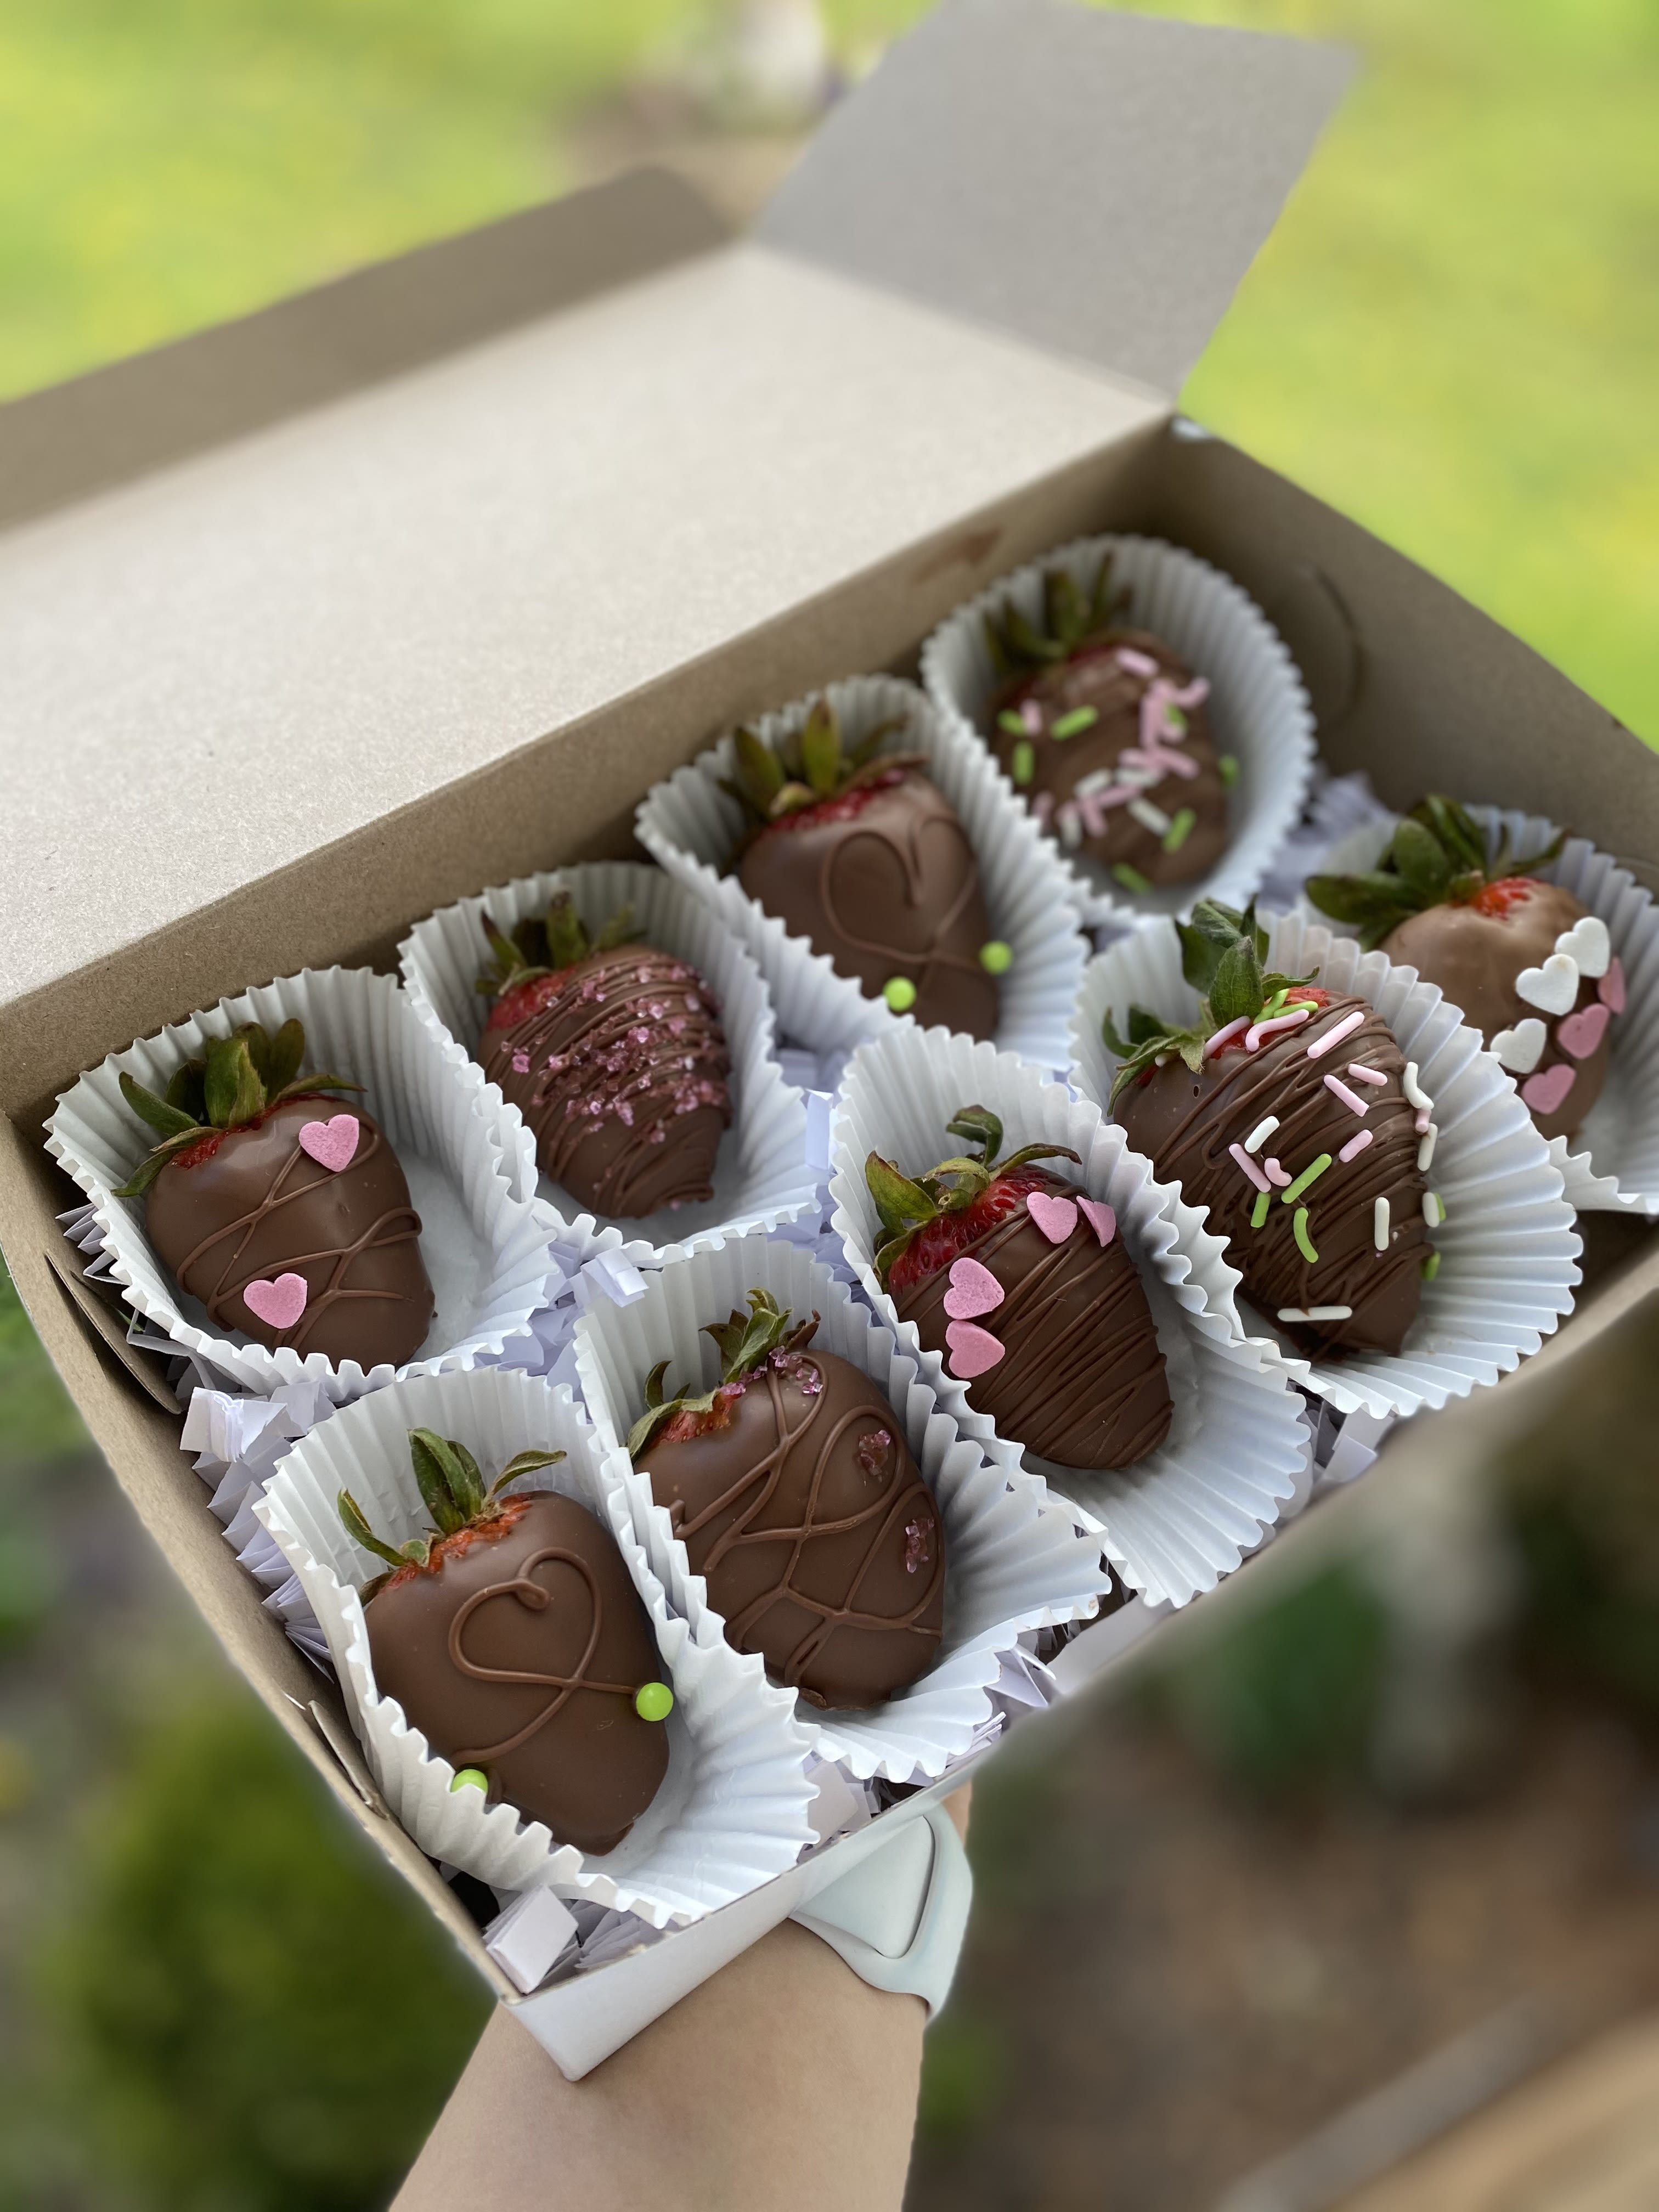 Strawberries with Chocolate Heart – Chocolate Place